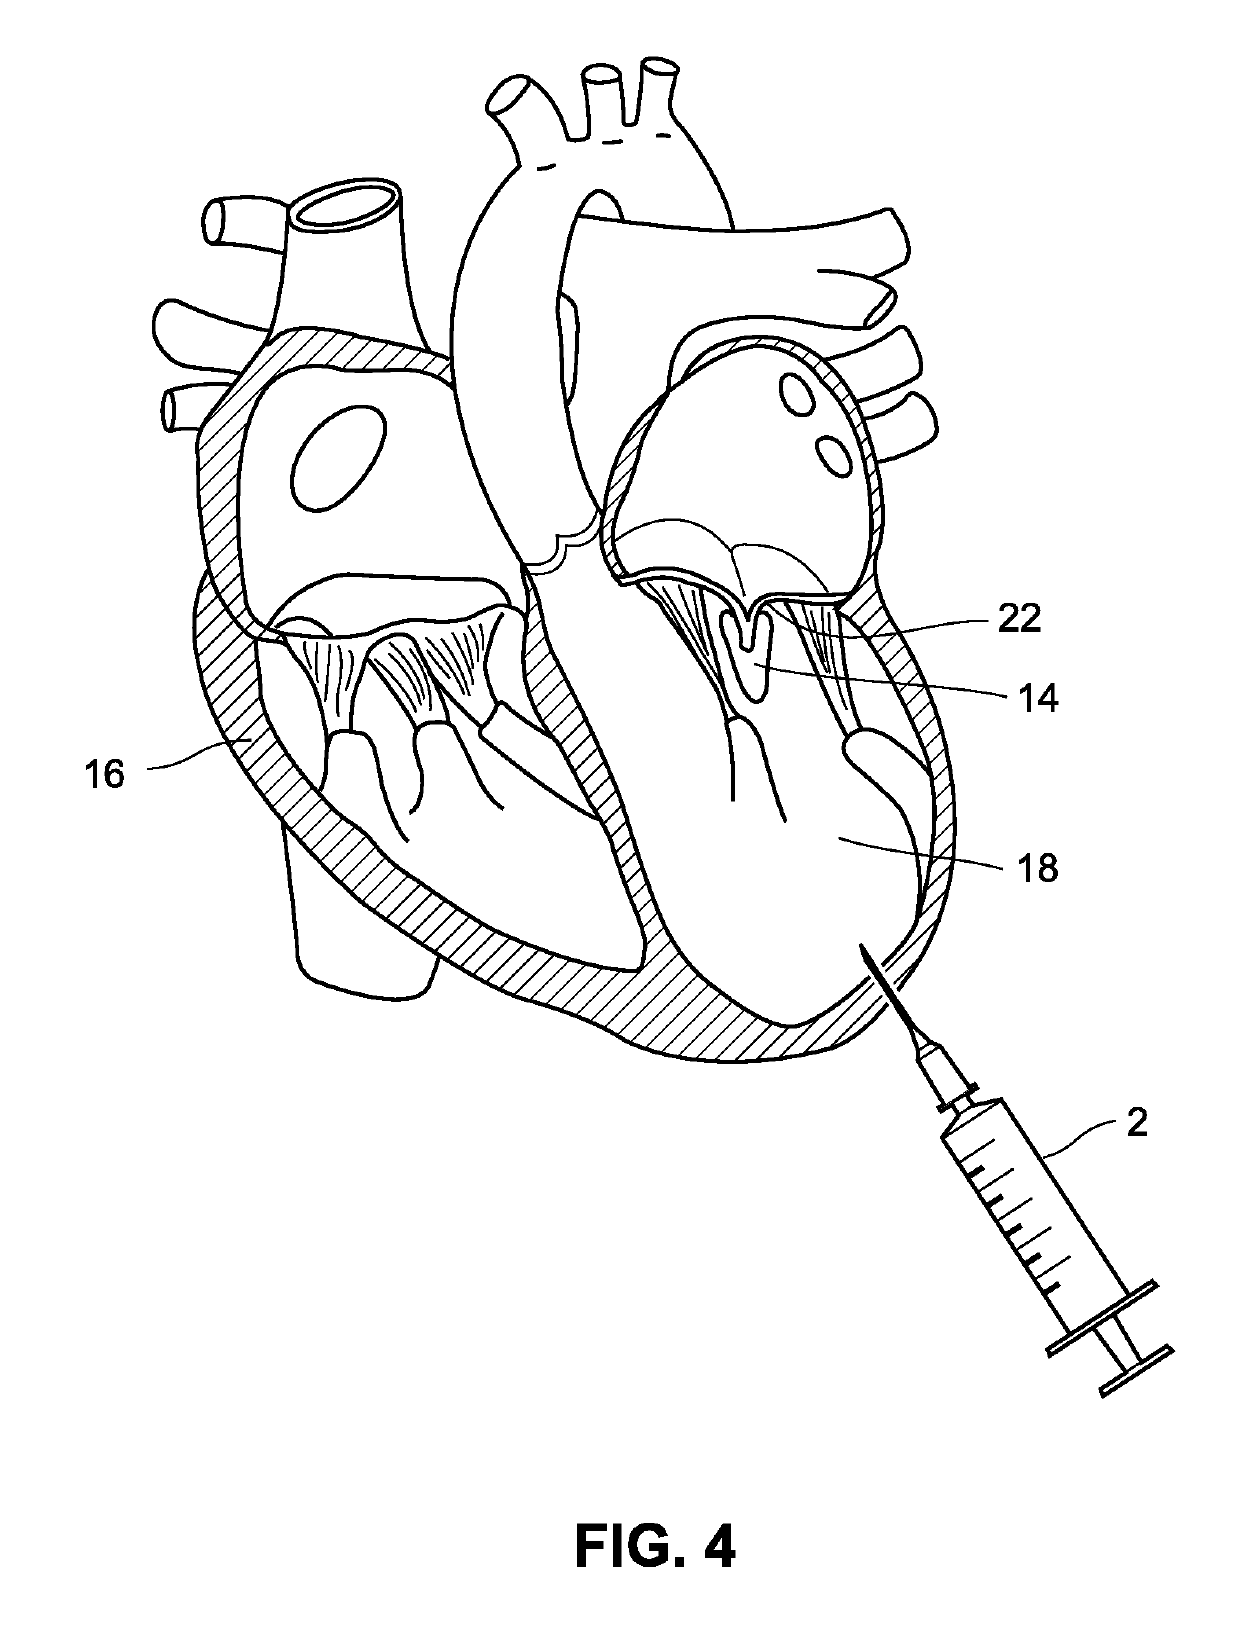 Transapical removal device